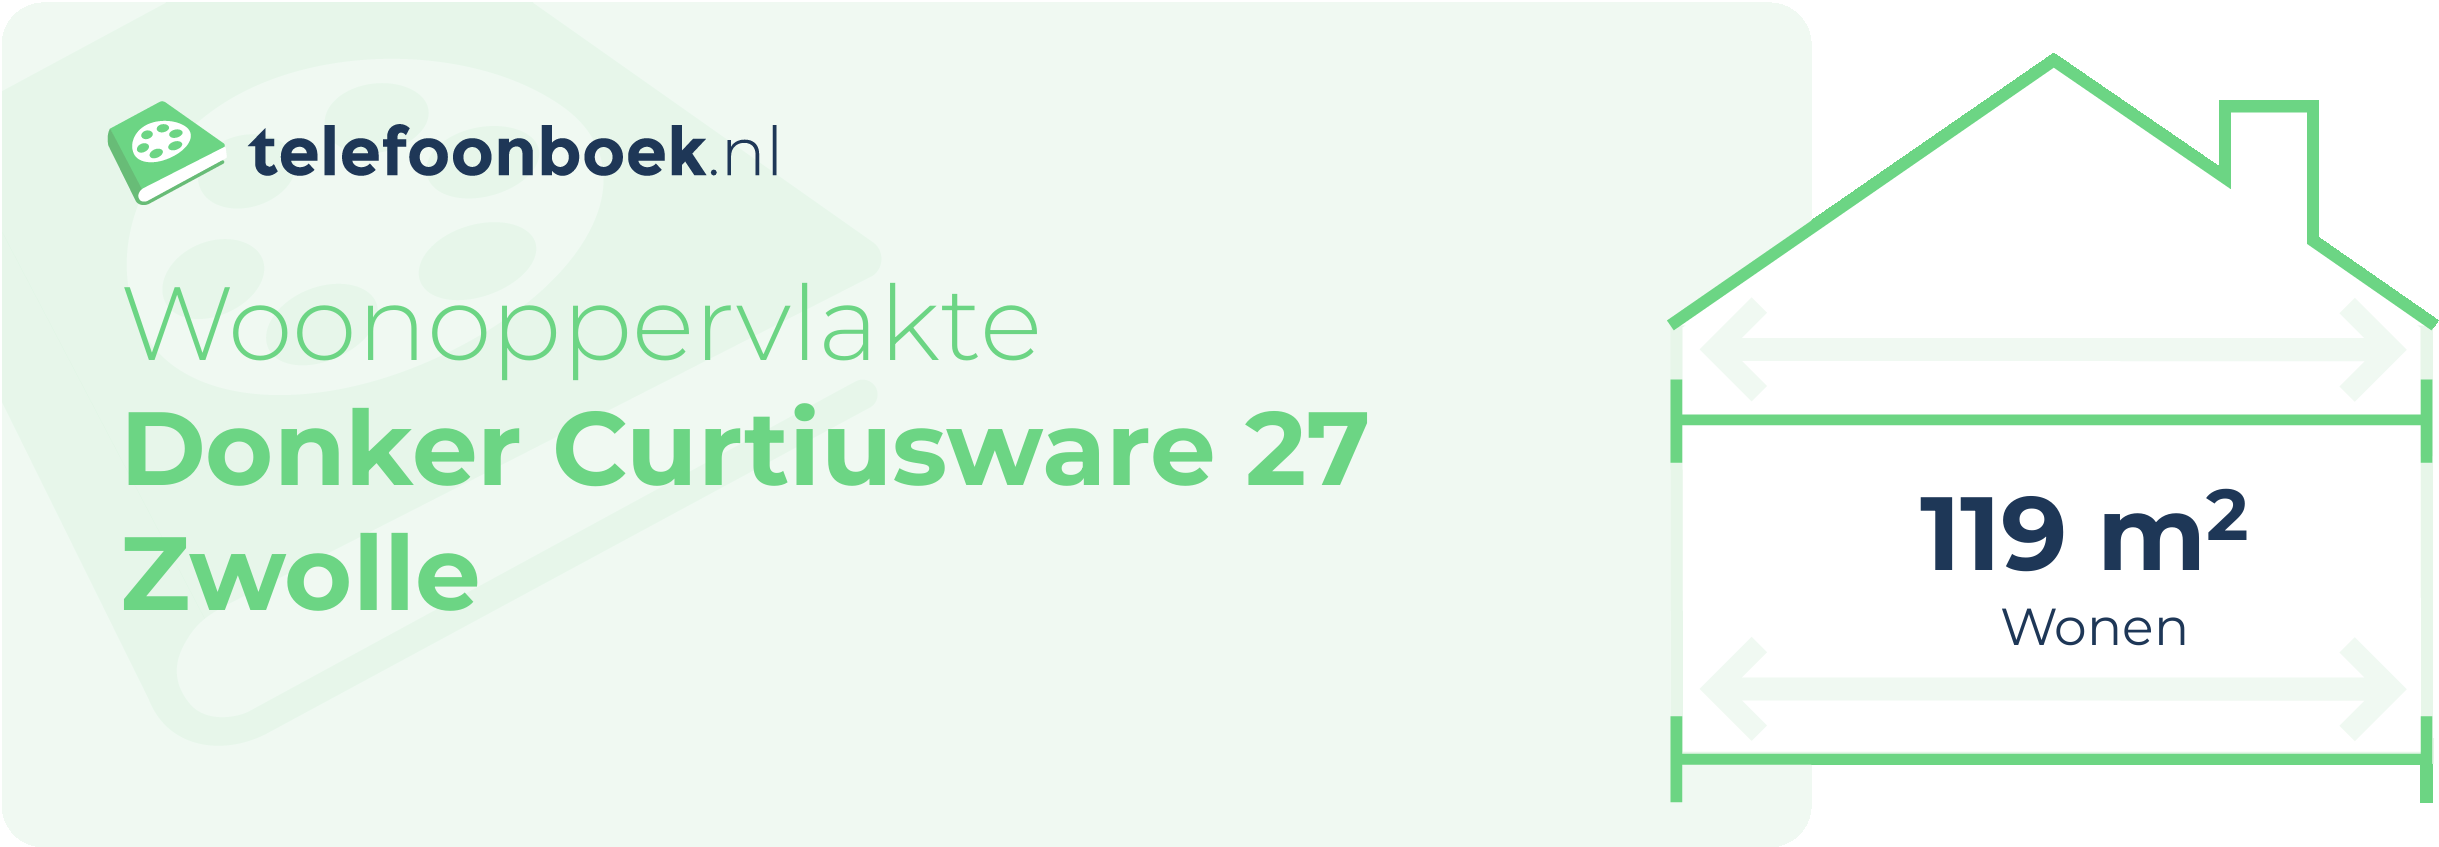 Woonoppervlakte Donker Curtiusware 27 Zwolle